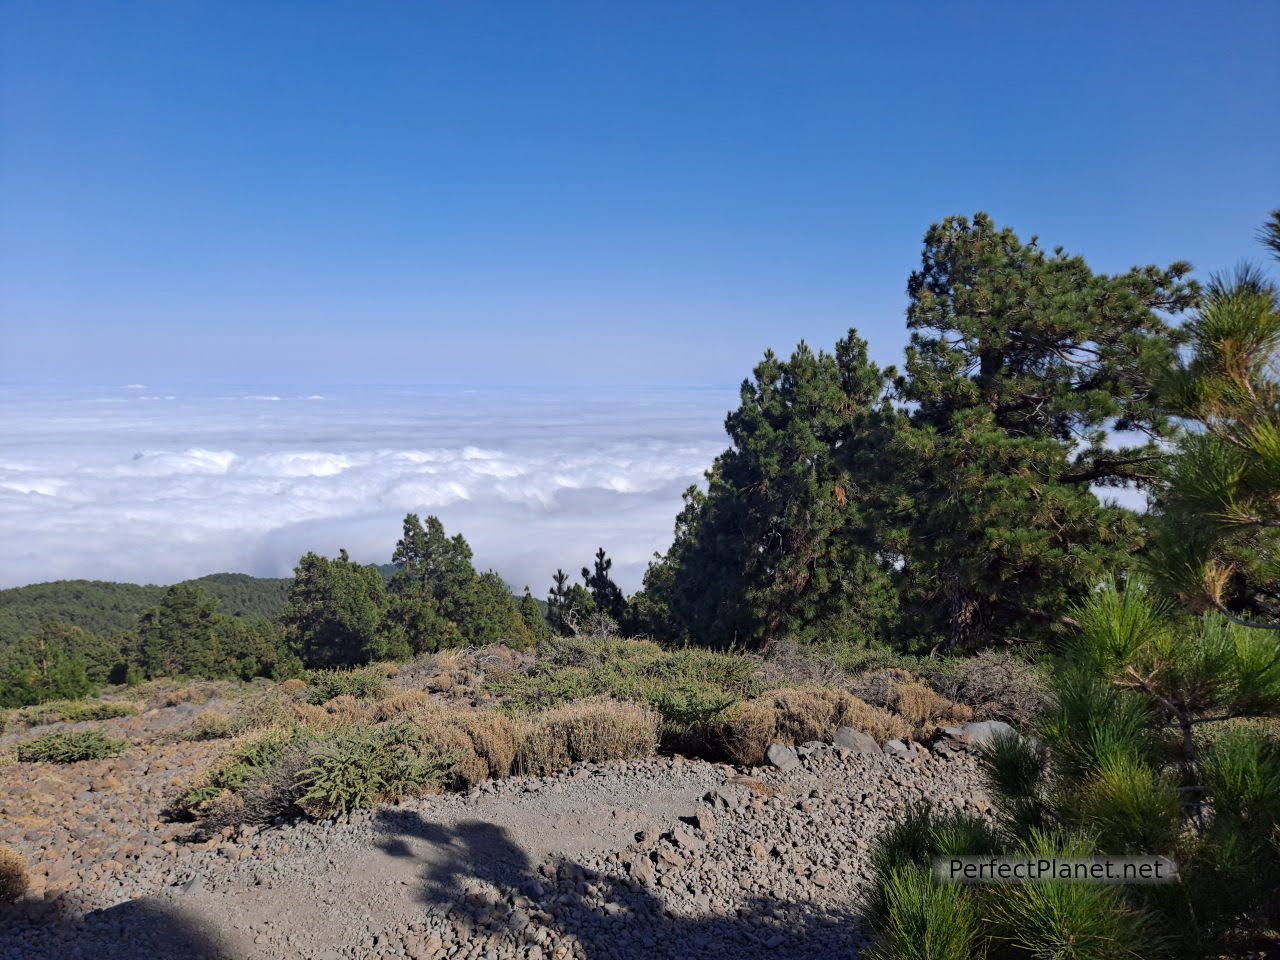 Teide in the background